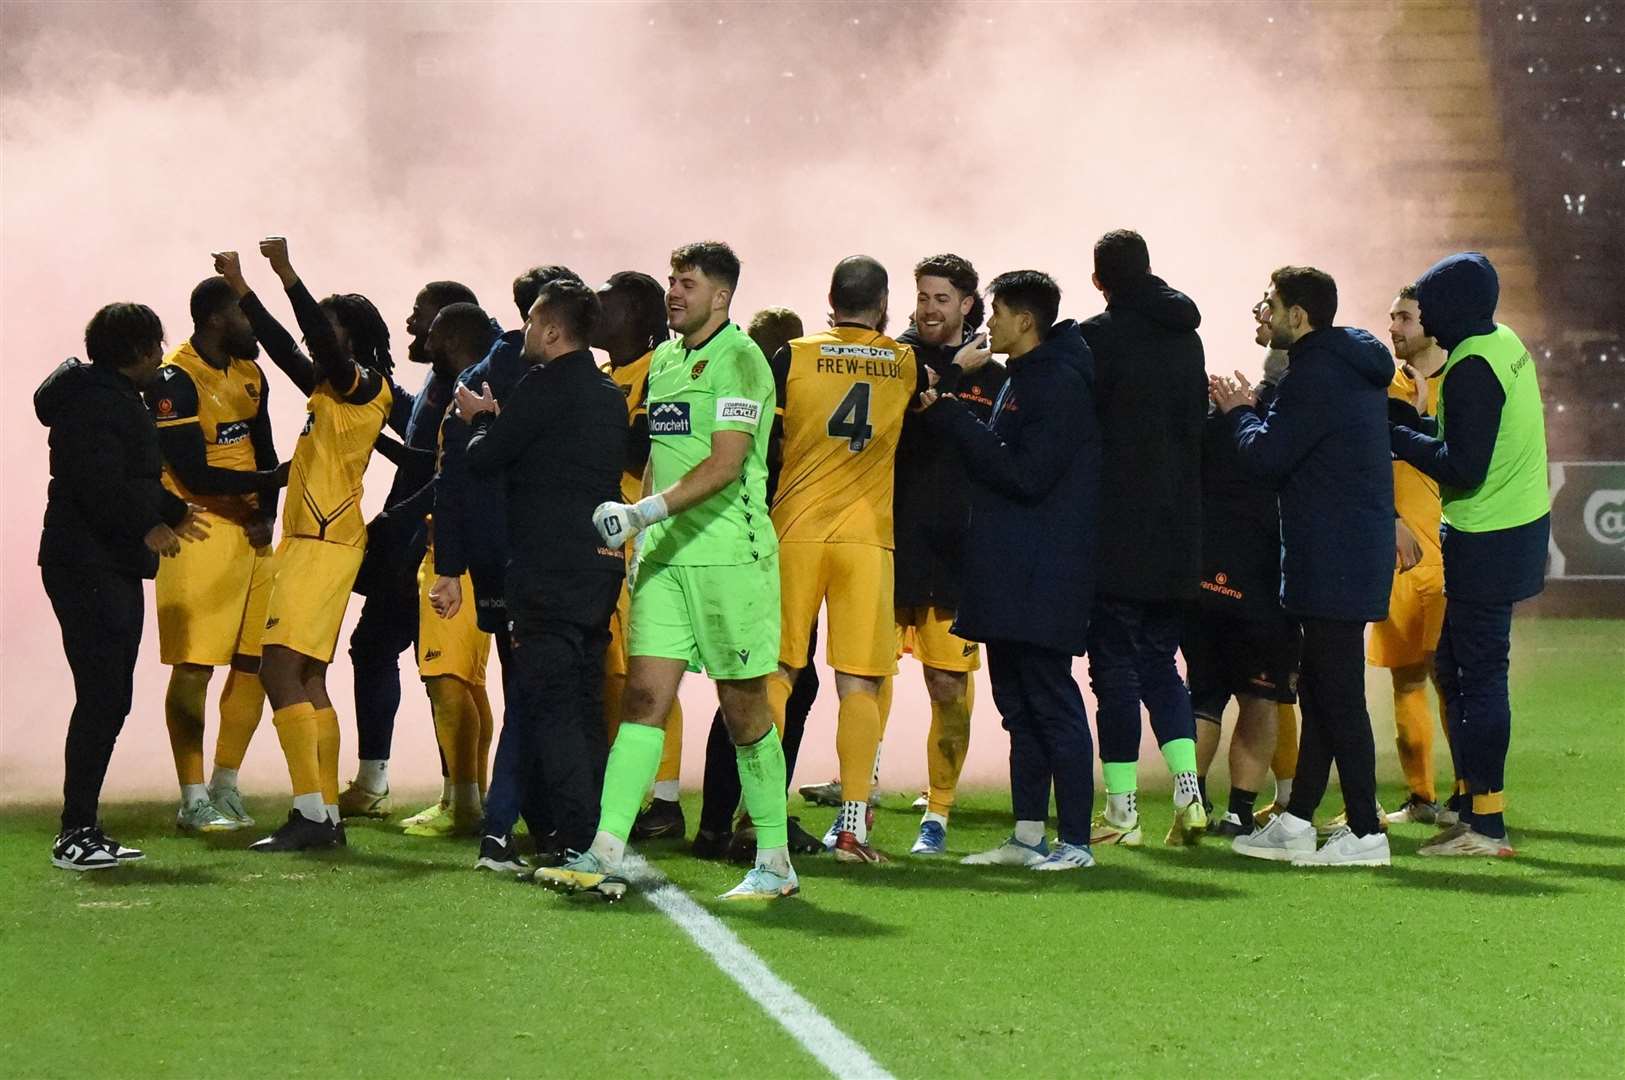 Maidstone players celebrate after reaching the last 16 of the FA Trophy. Picture: Steve Terrell